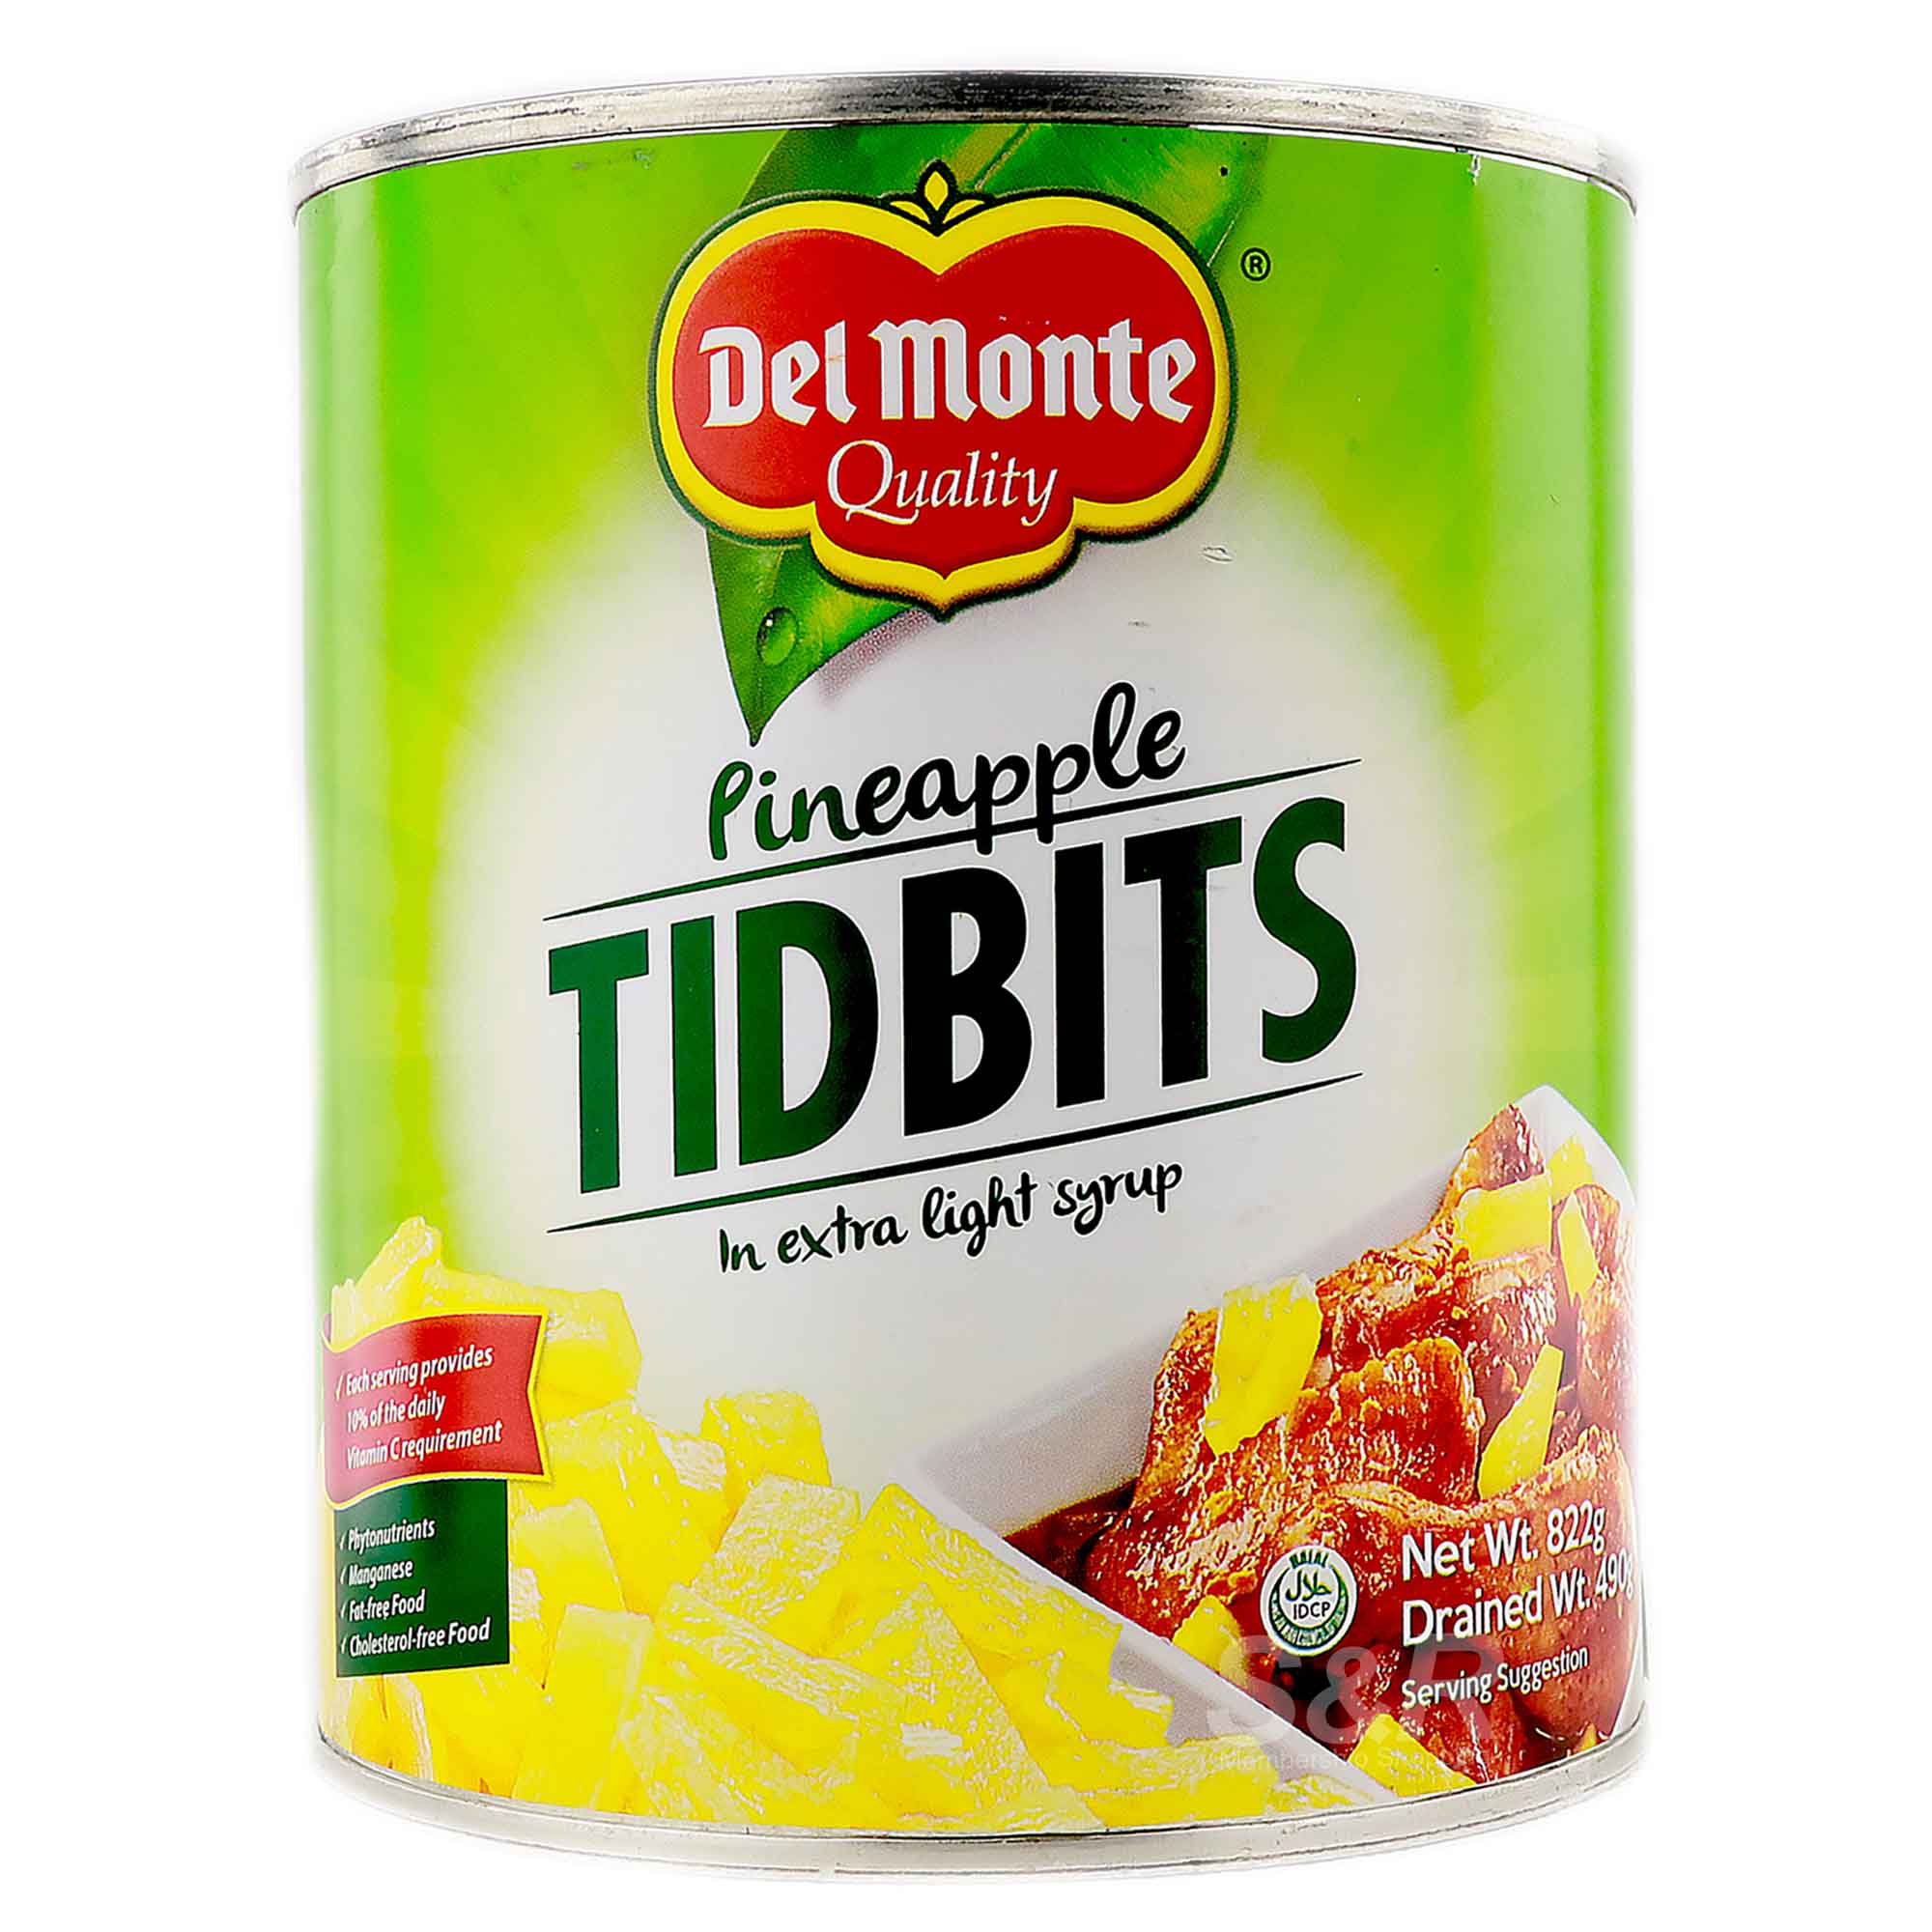 Del Monte Pineapple Tidbits in Extra Light Syrup 822g